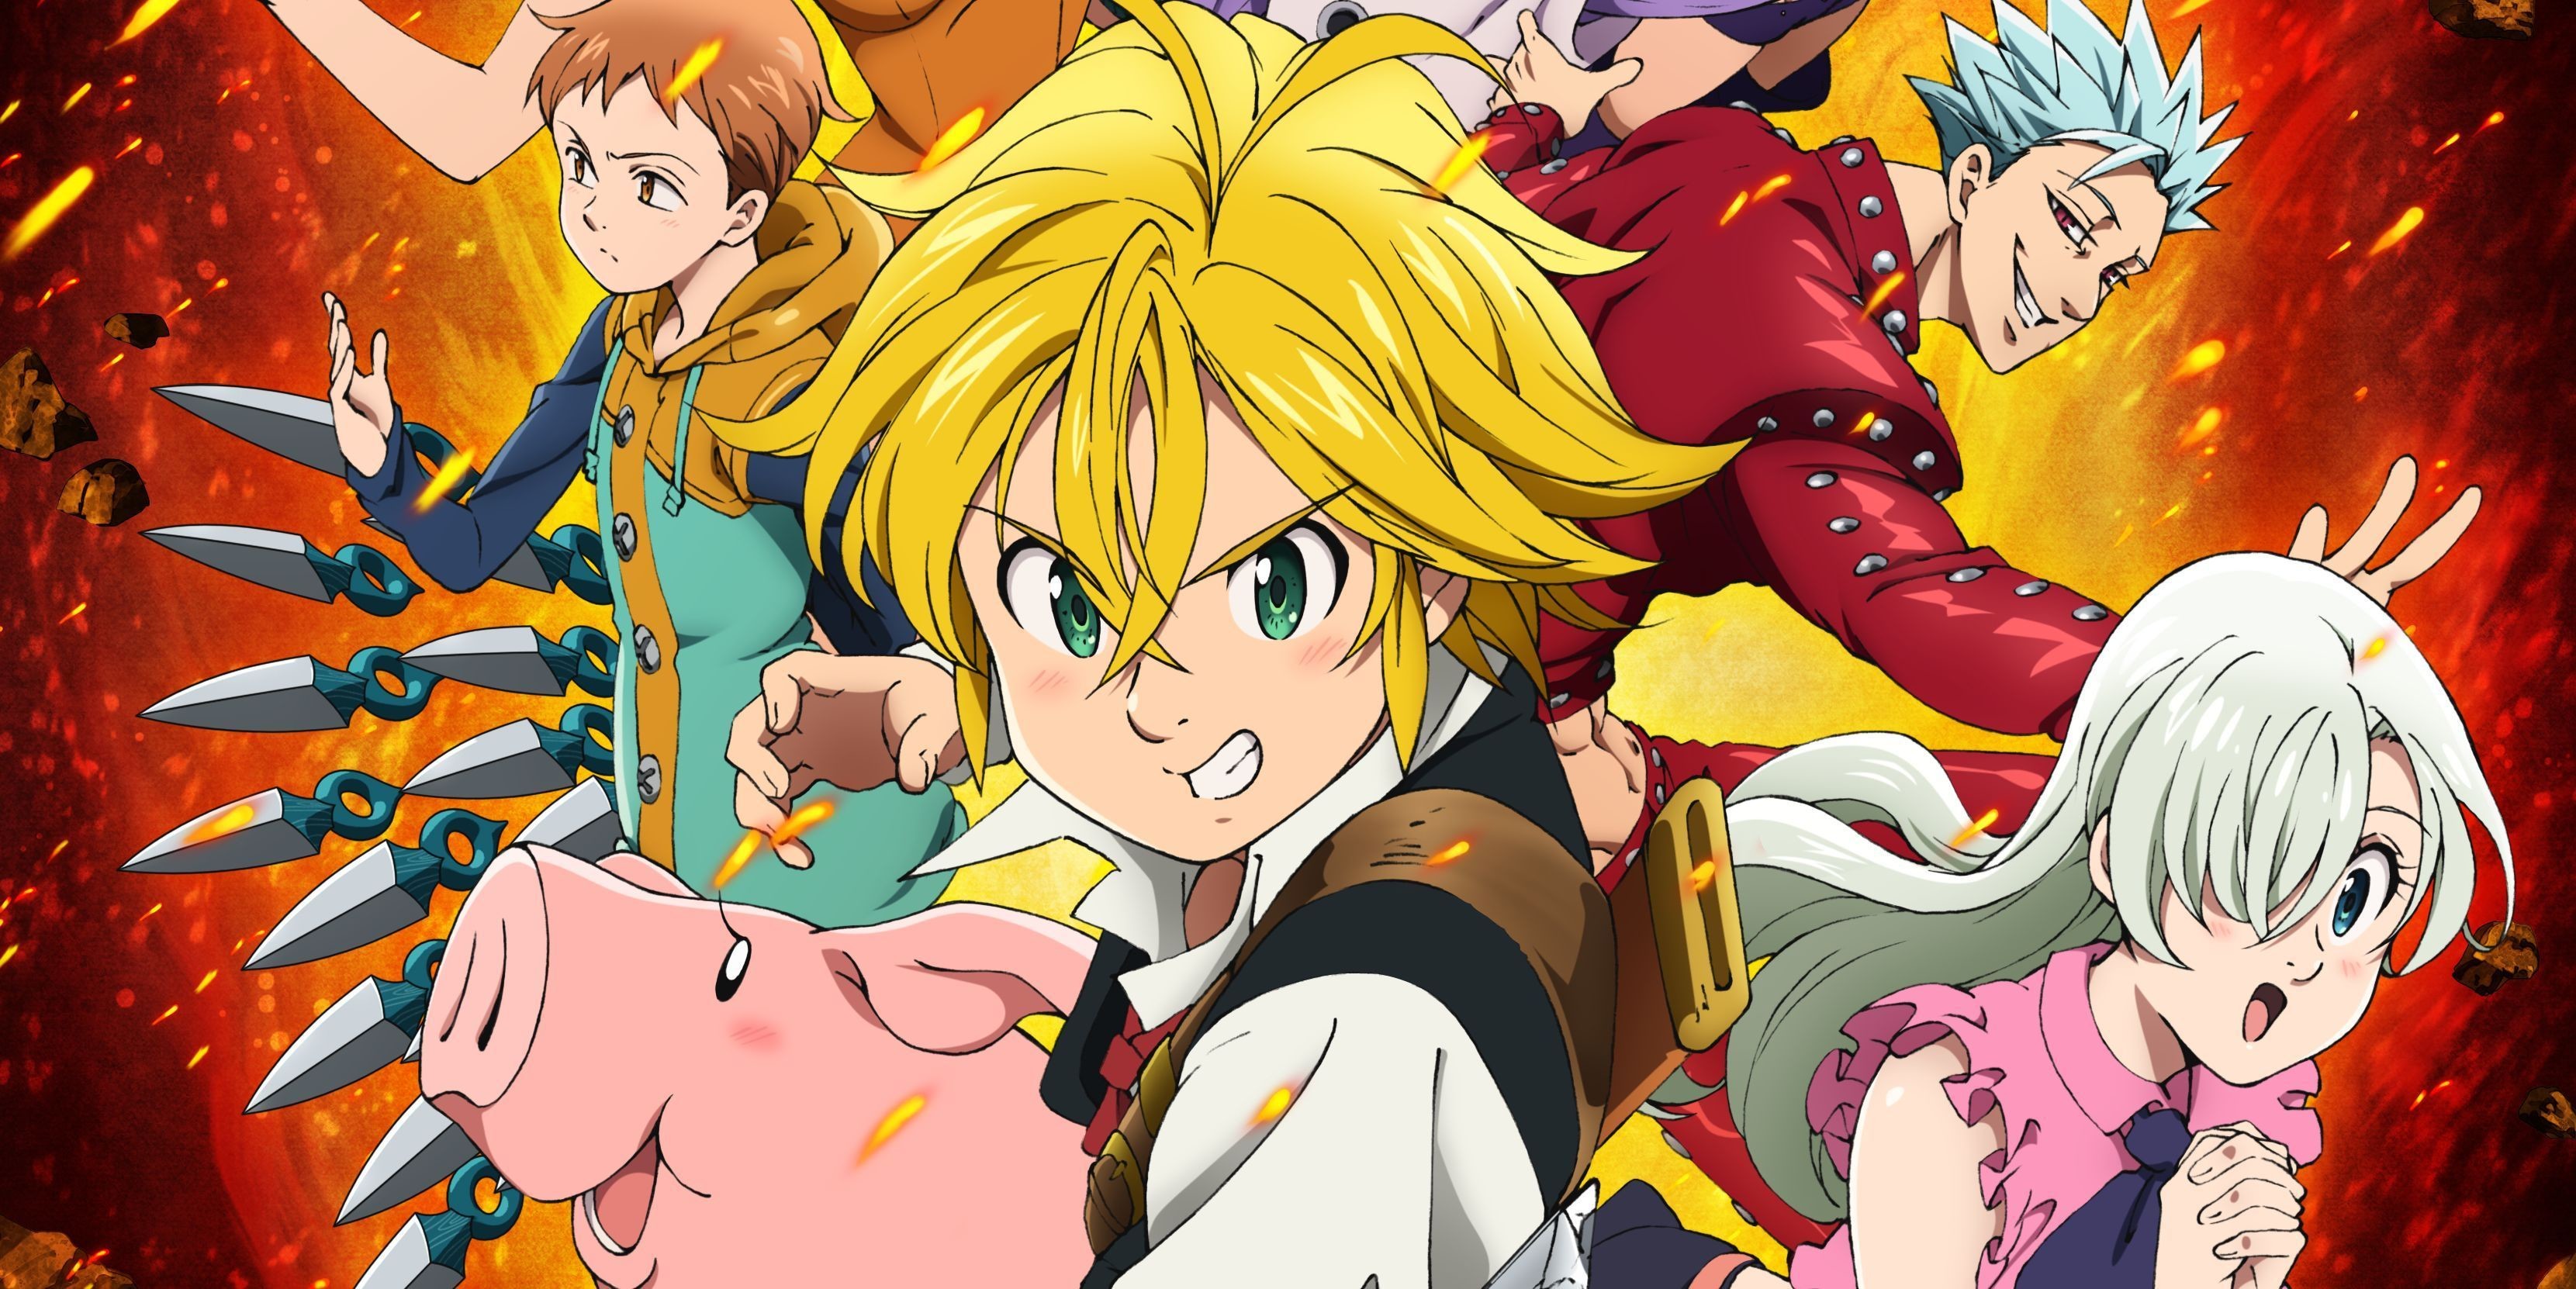 Anime The Seven Deadly Sins HD Wallpaper by Reverendtundra